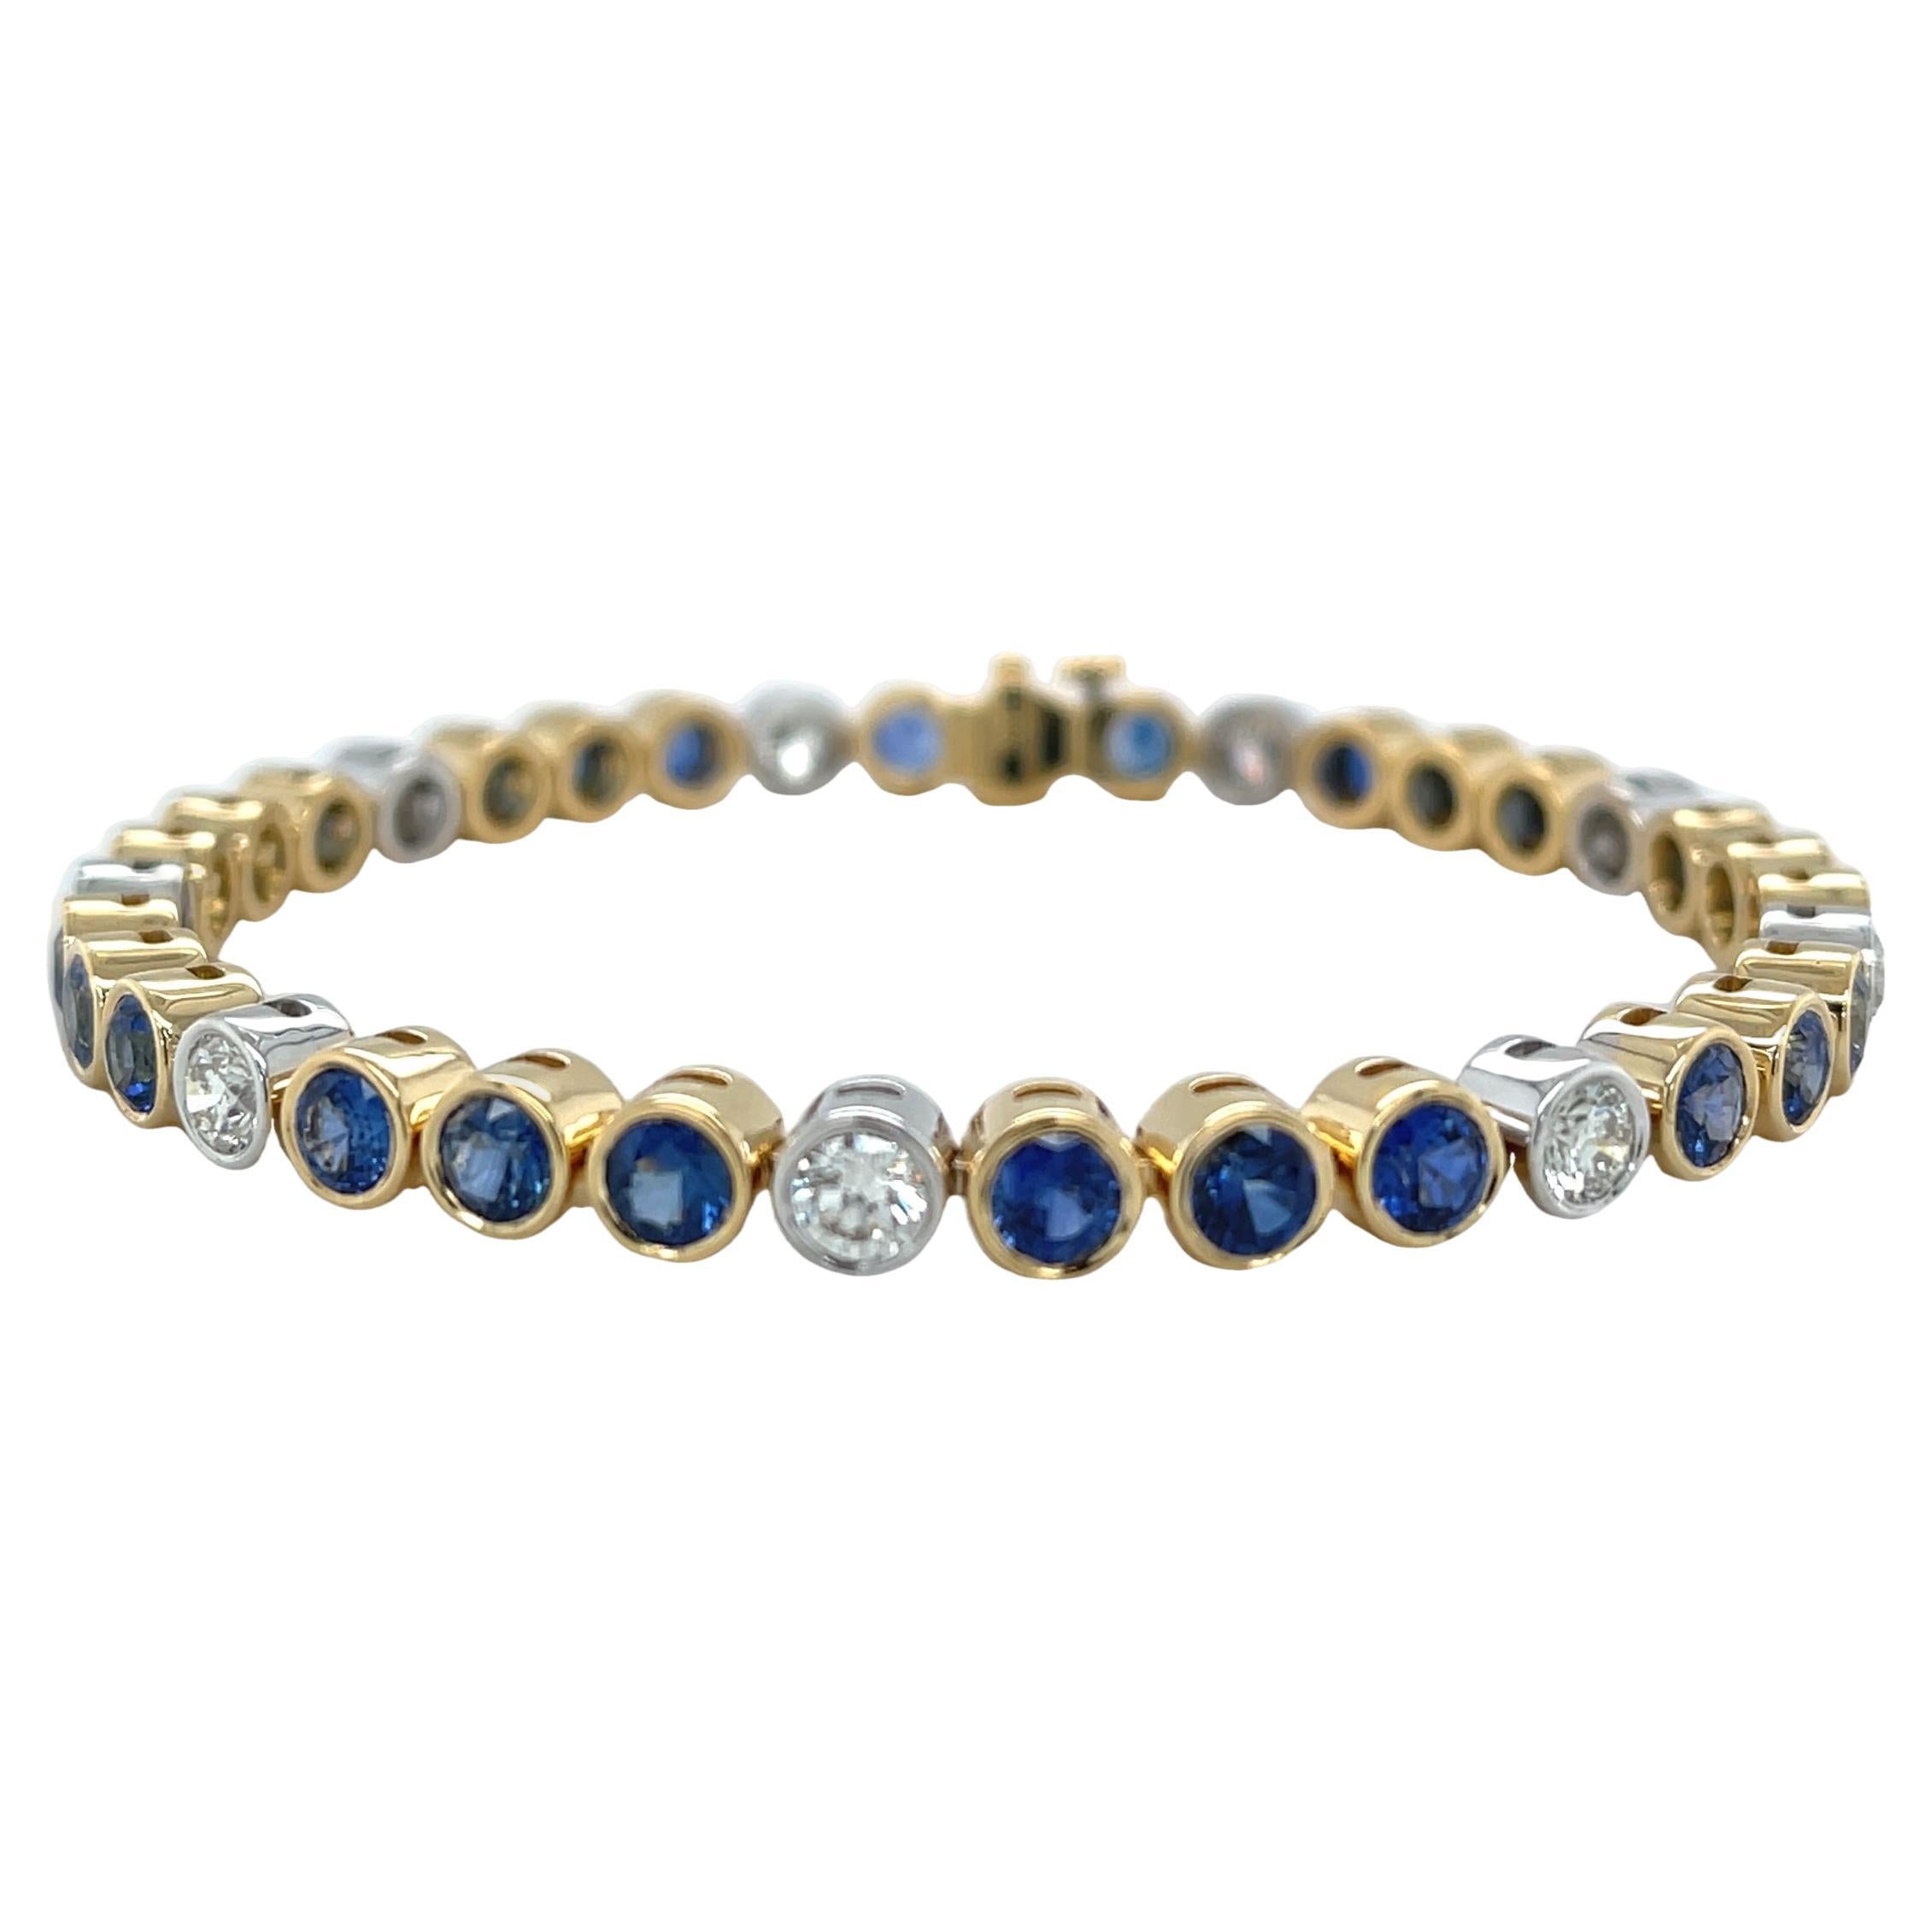  Blue Sapphire and Diamond Tennis Bracelet in 18k Gold, 7.49 Carats Total For Sale